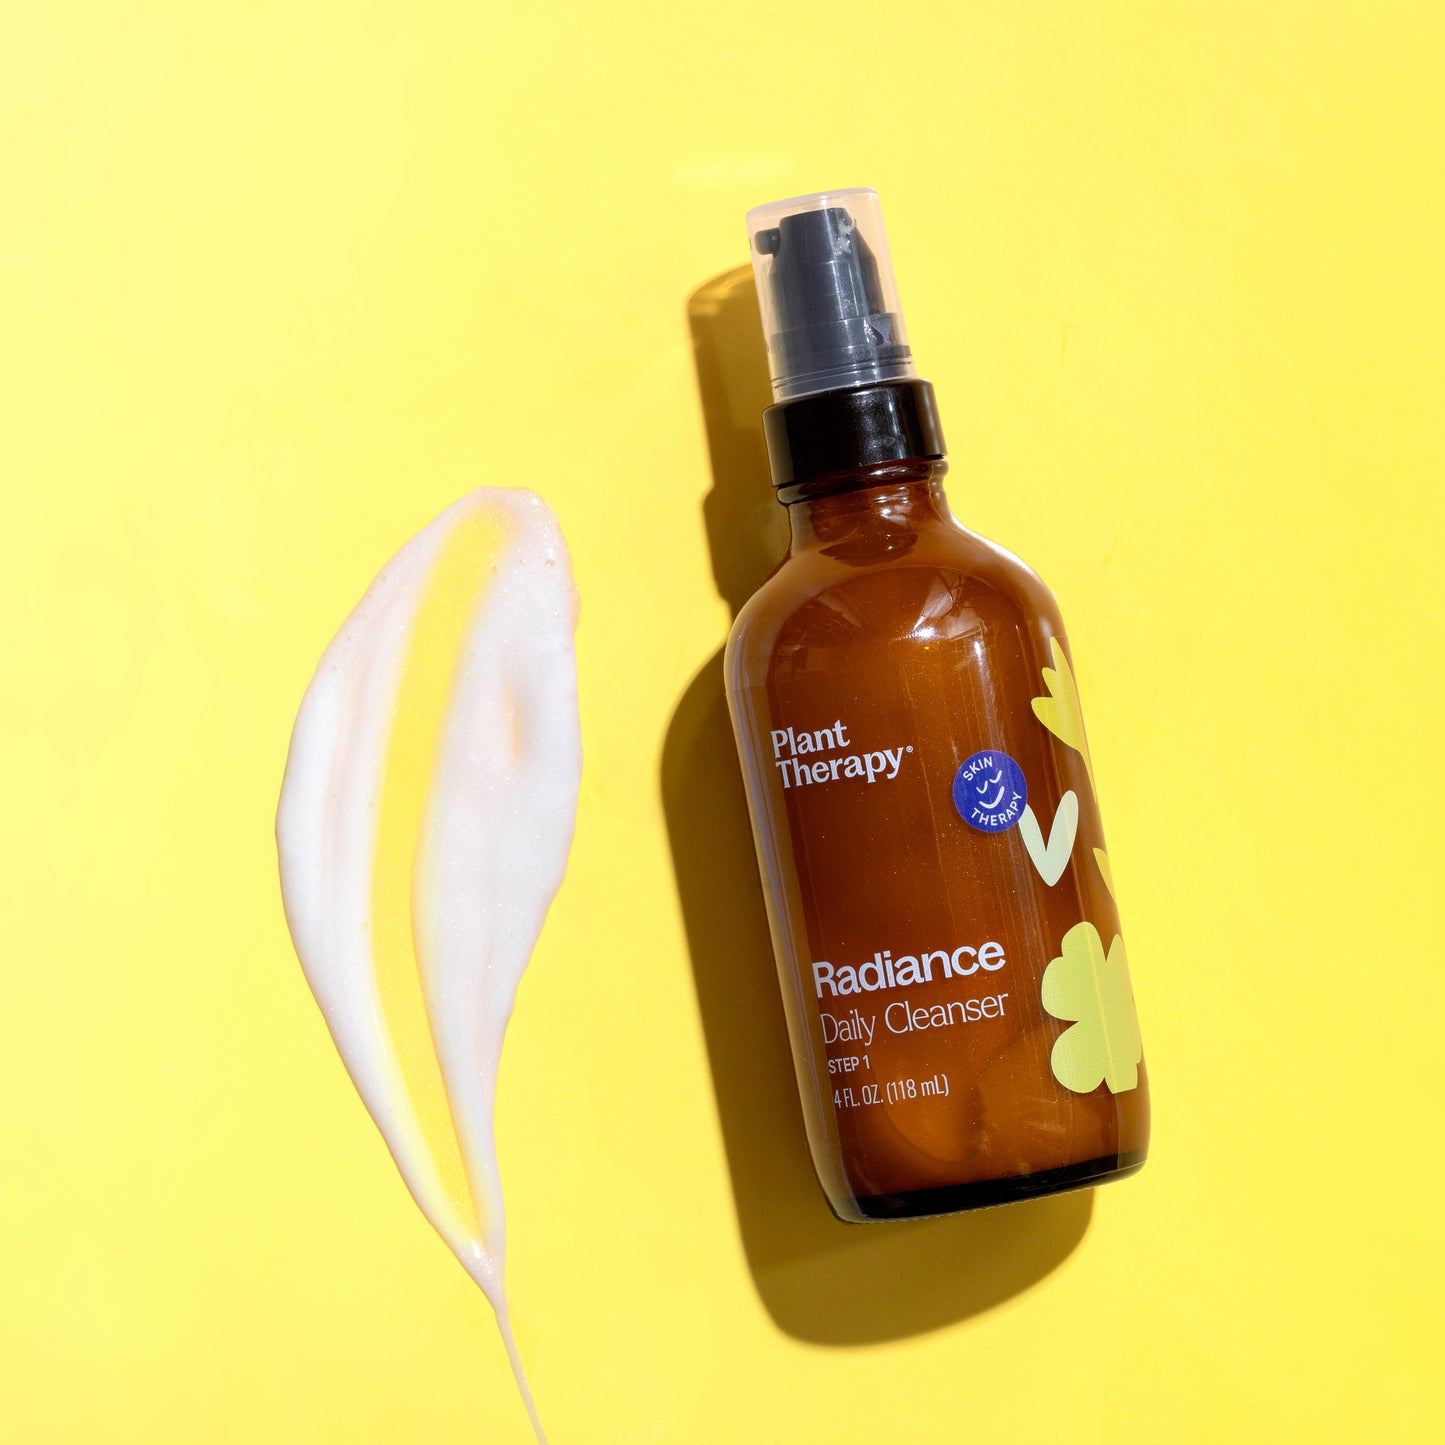 Radiance Daily Cleanser